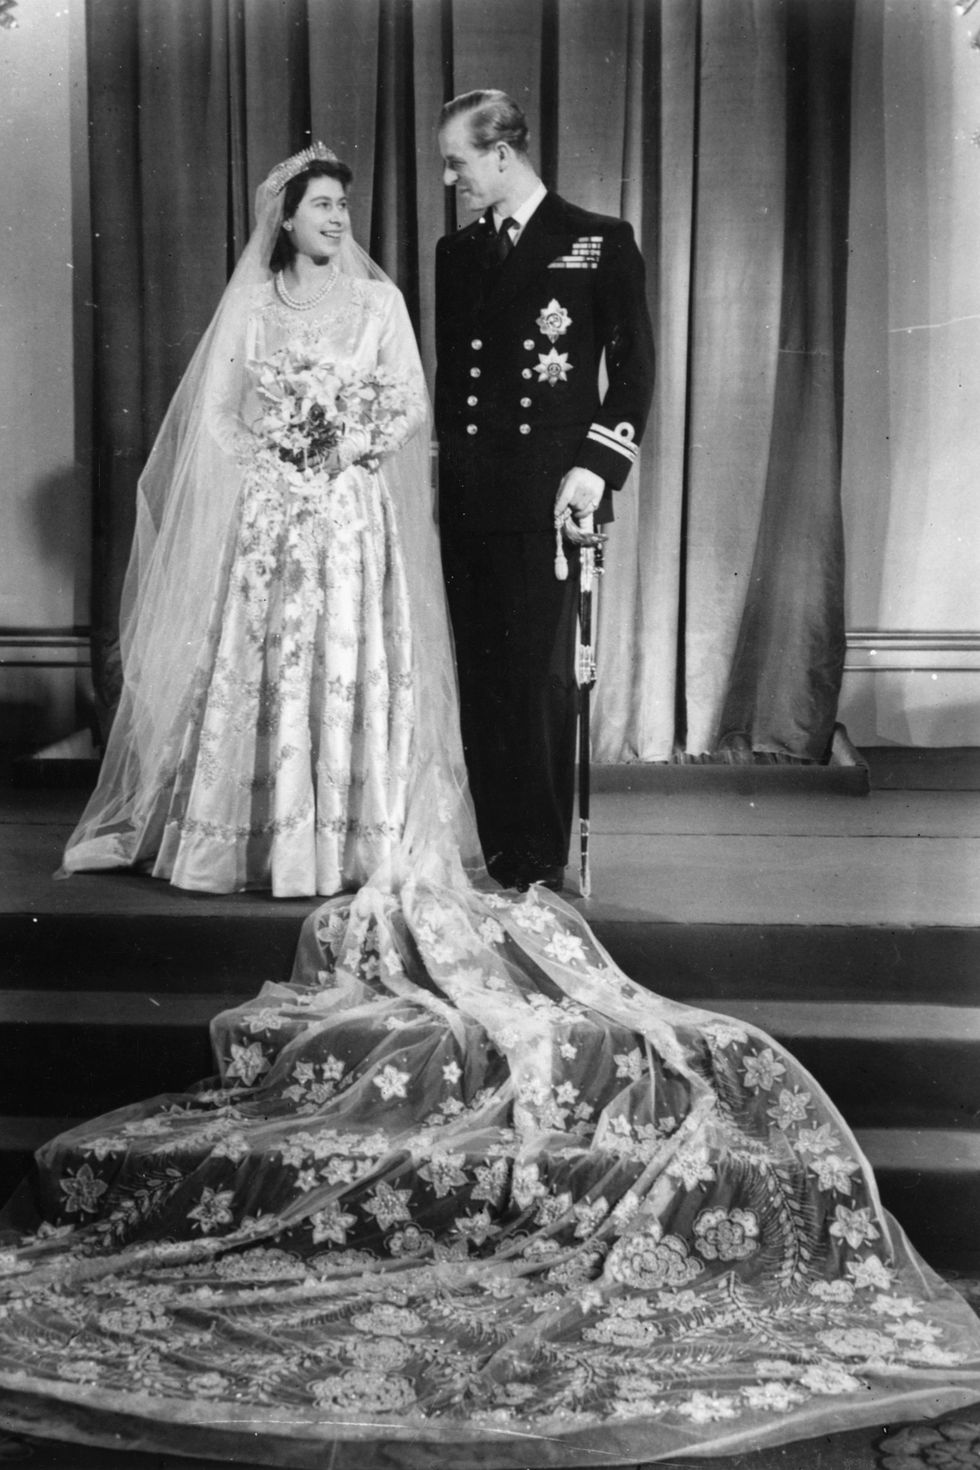 20th November 1947: Princess Elizabeth with Philip Mountbatten on their wedding day. (Photo by Topical Press Agency/Getty Images)